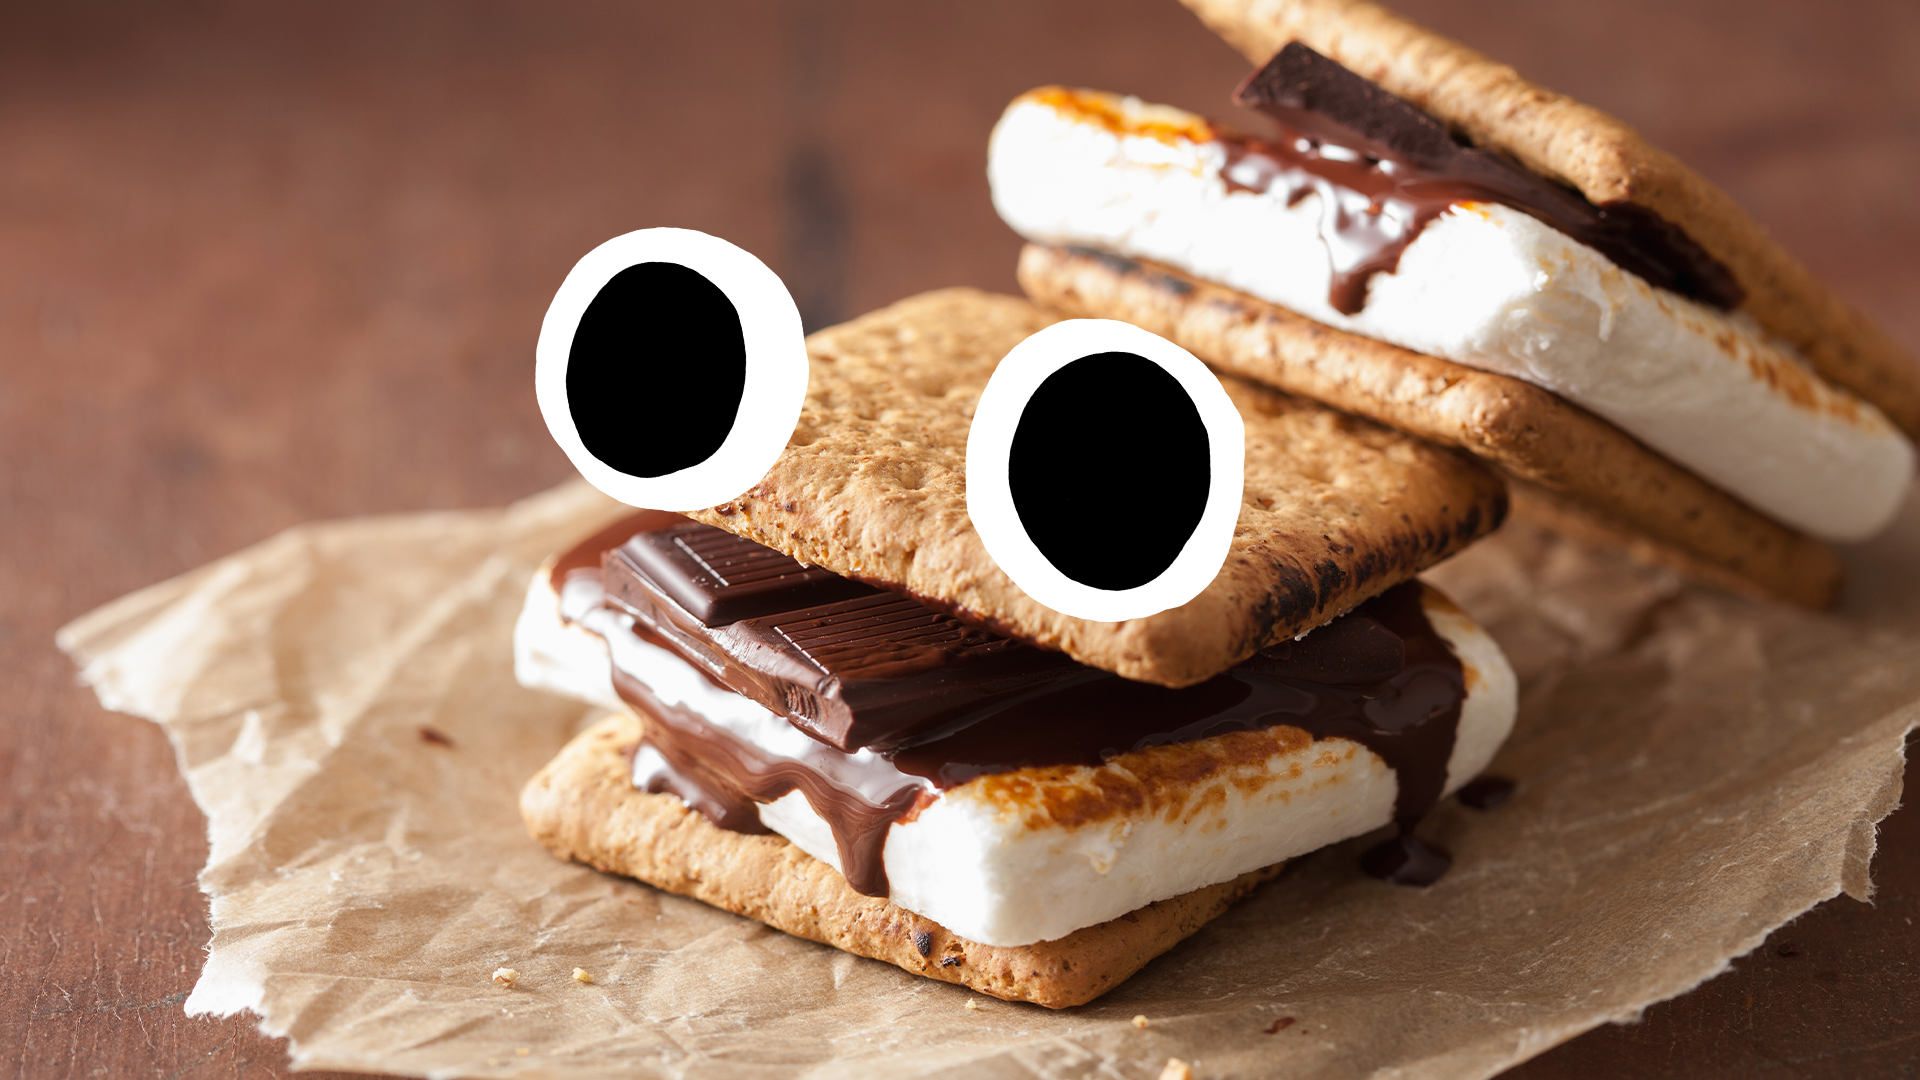 S'more with goofy face